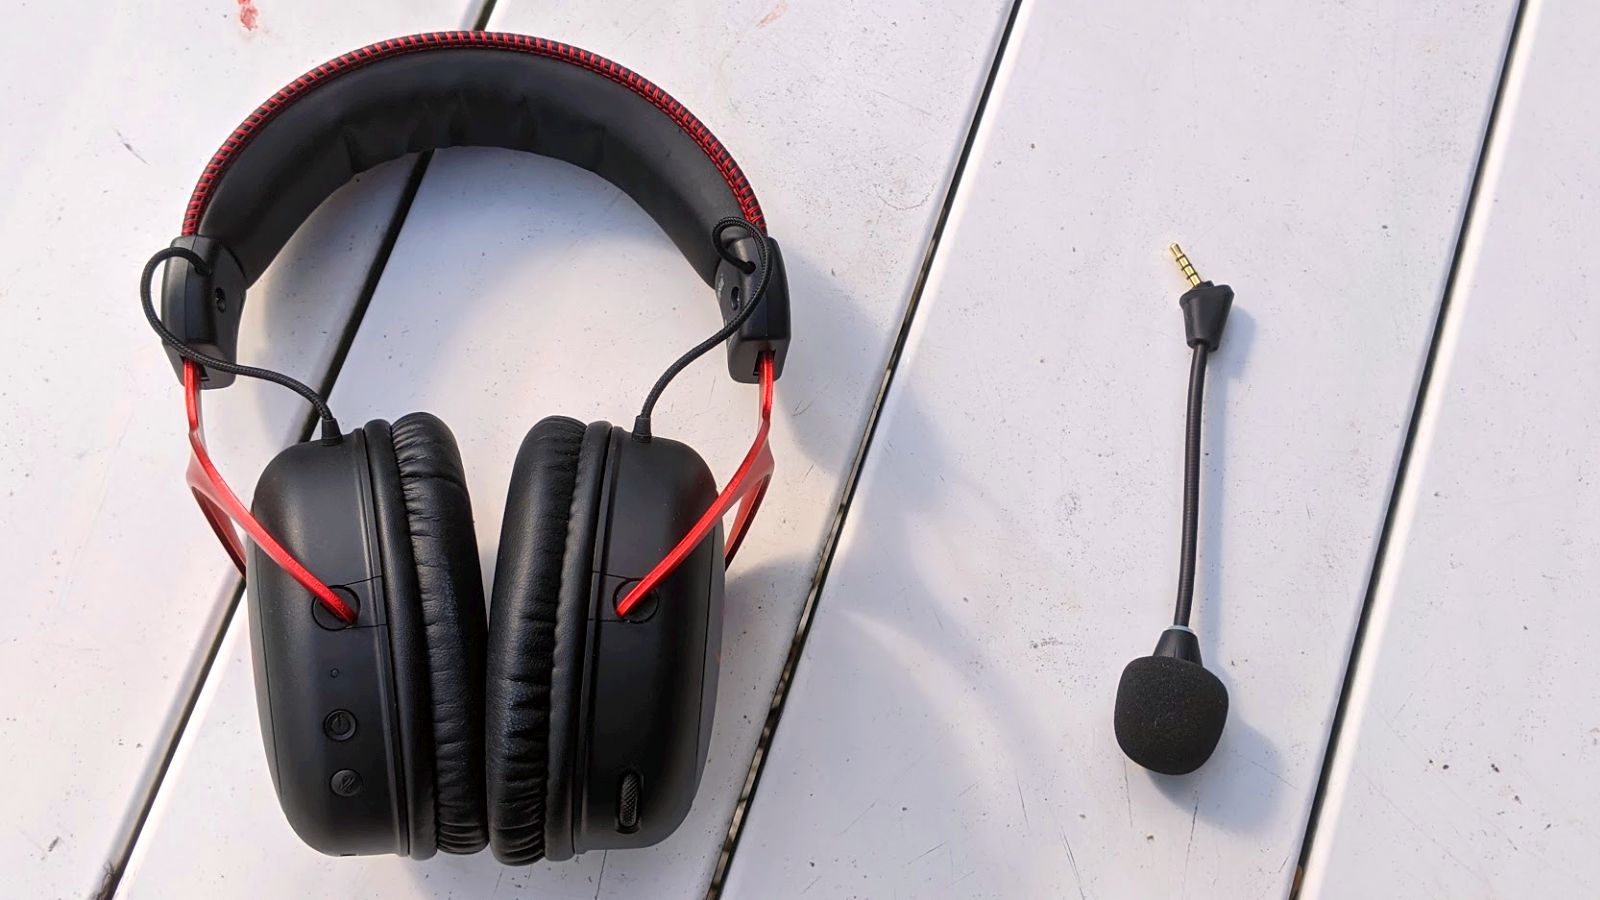 Hyper X Cloud II Wireless Review: Good Until You Plug the Mic In